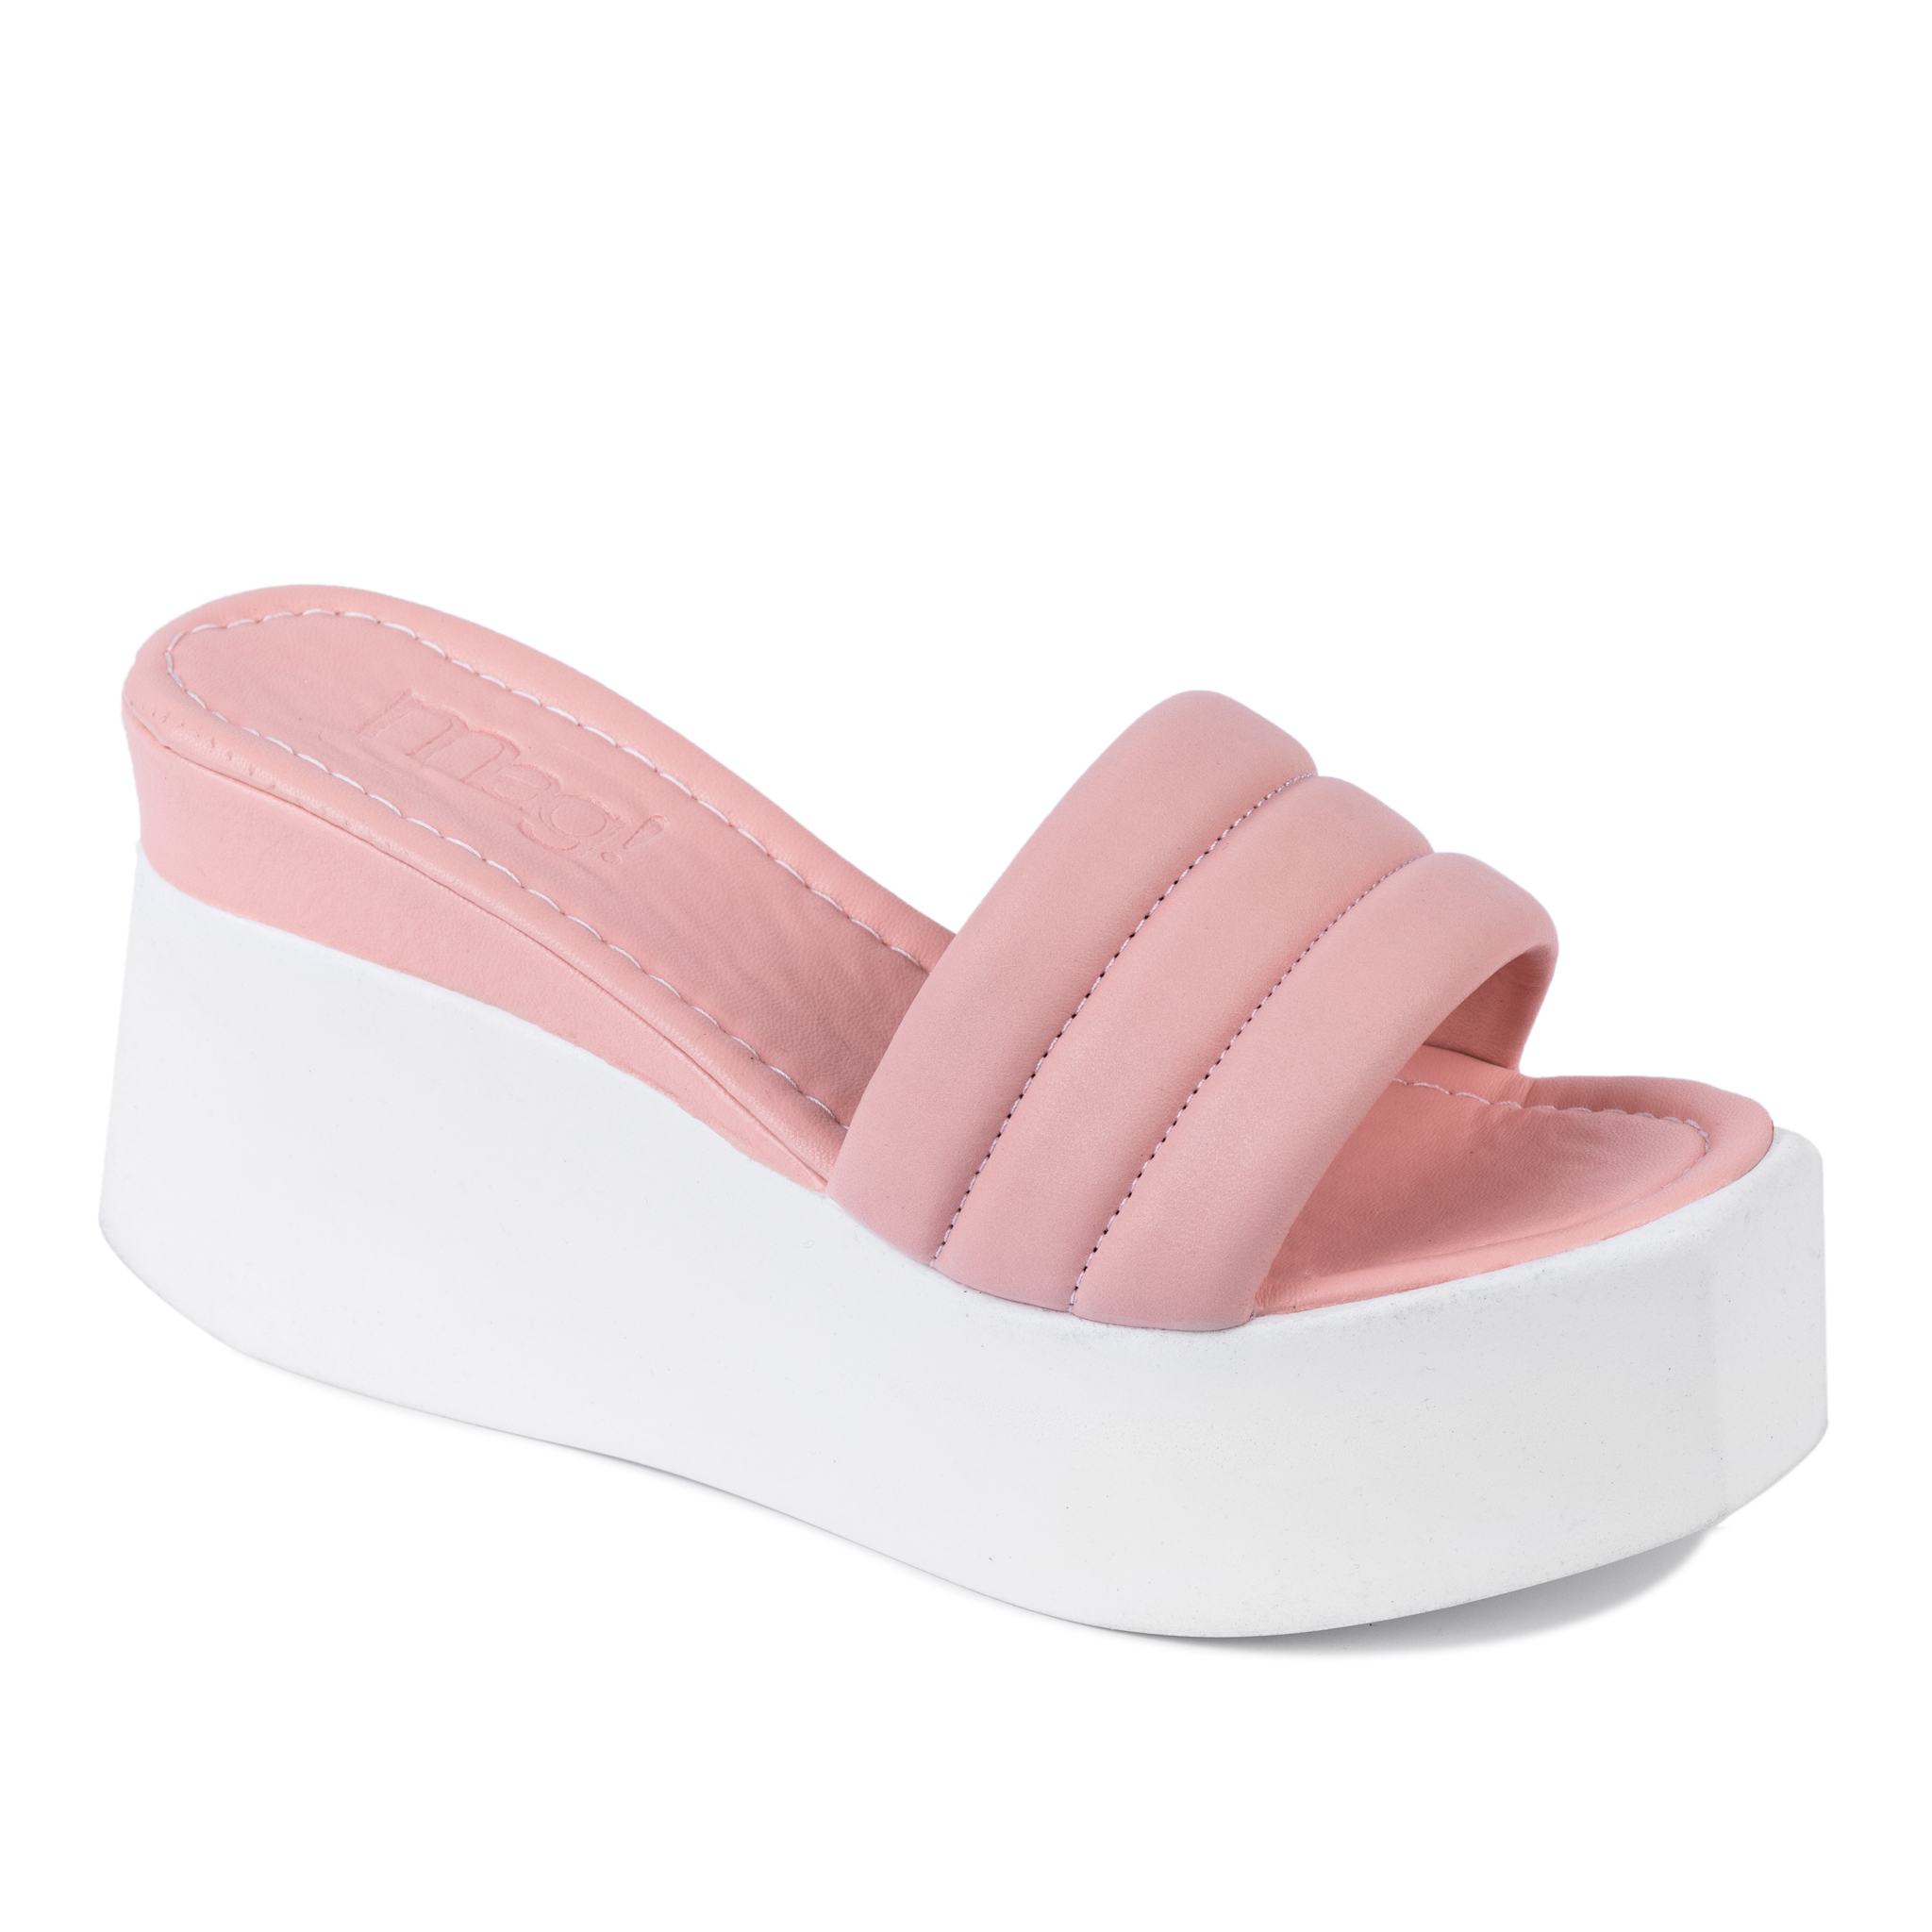 WEDGE SLIPPERS - ROSE